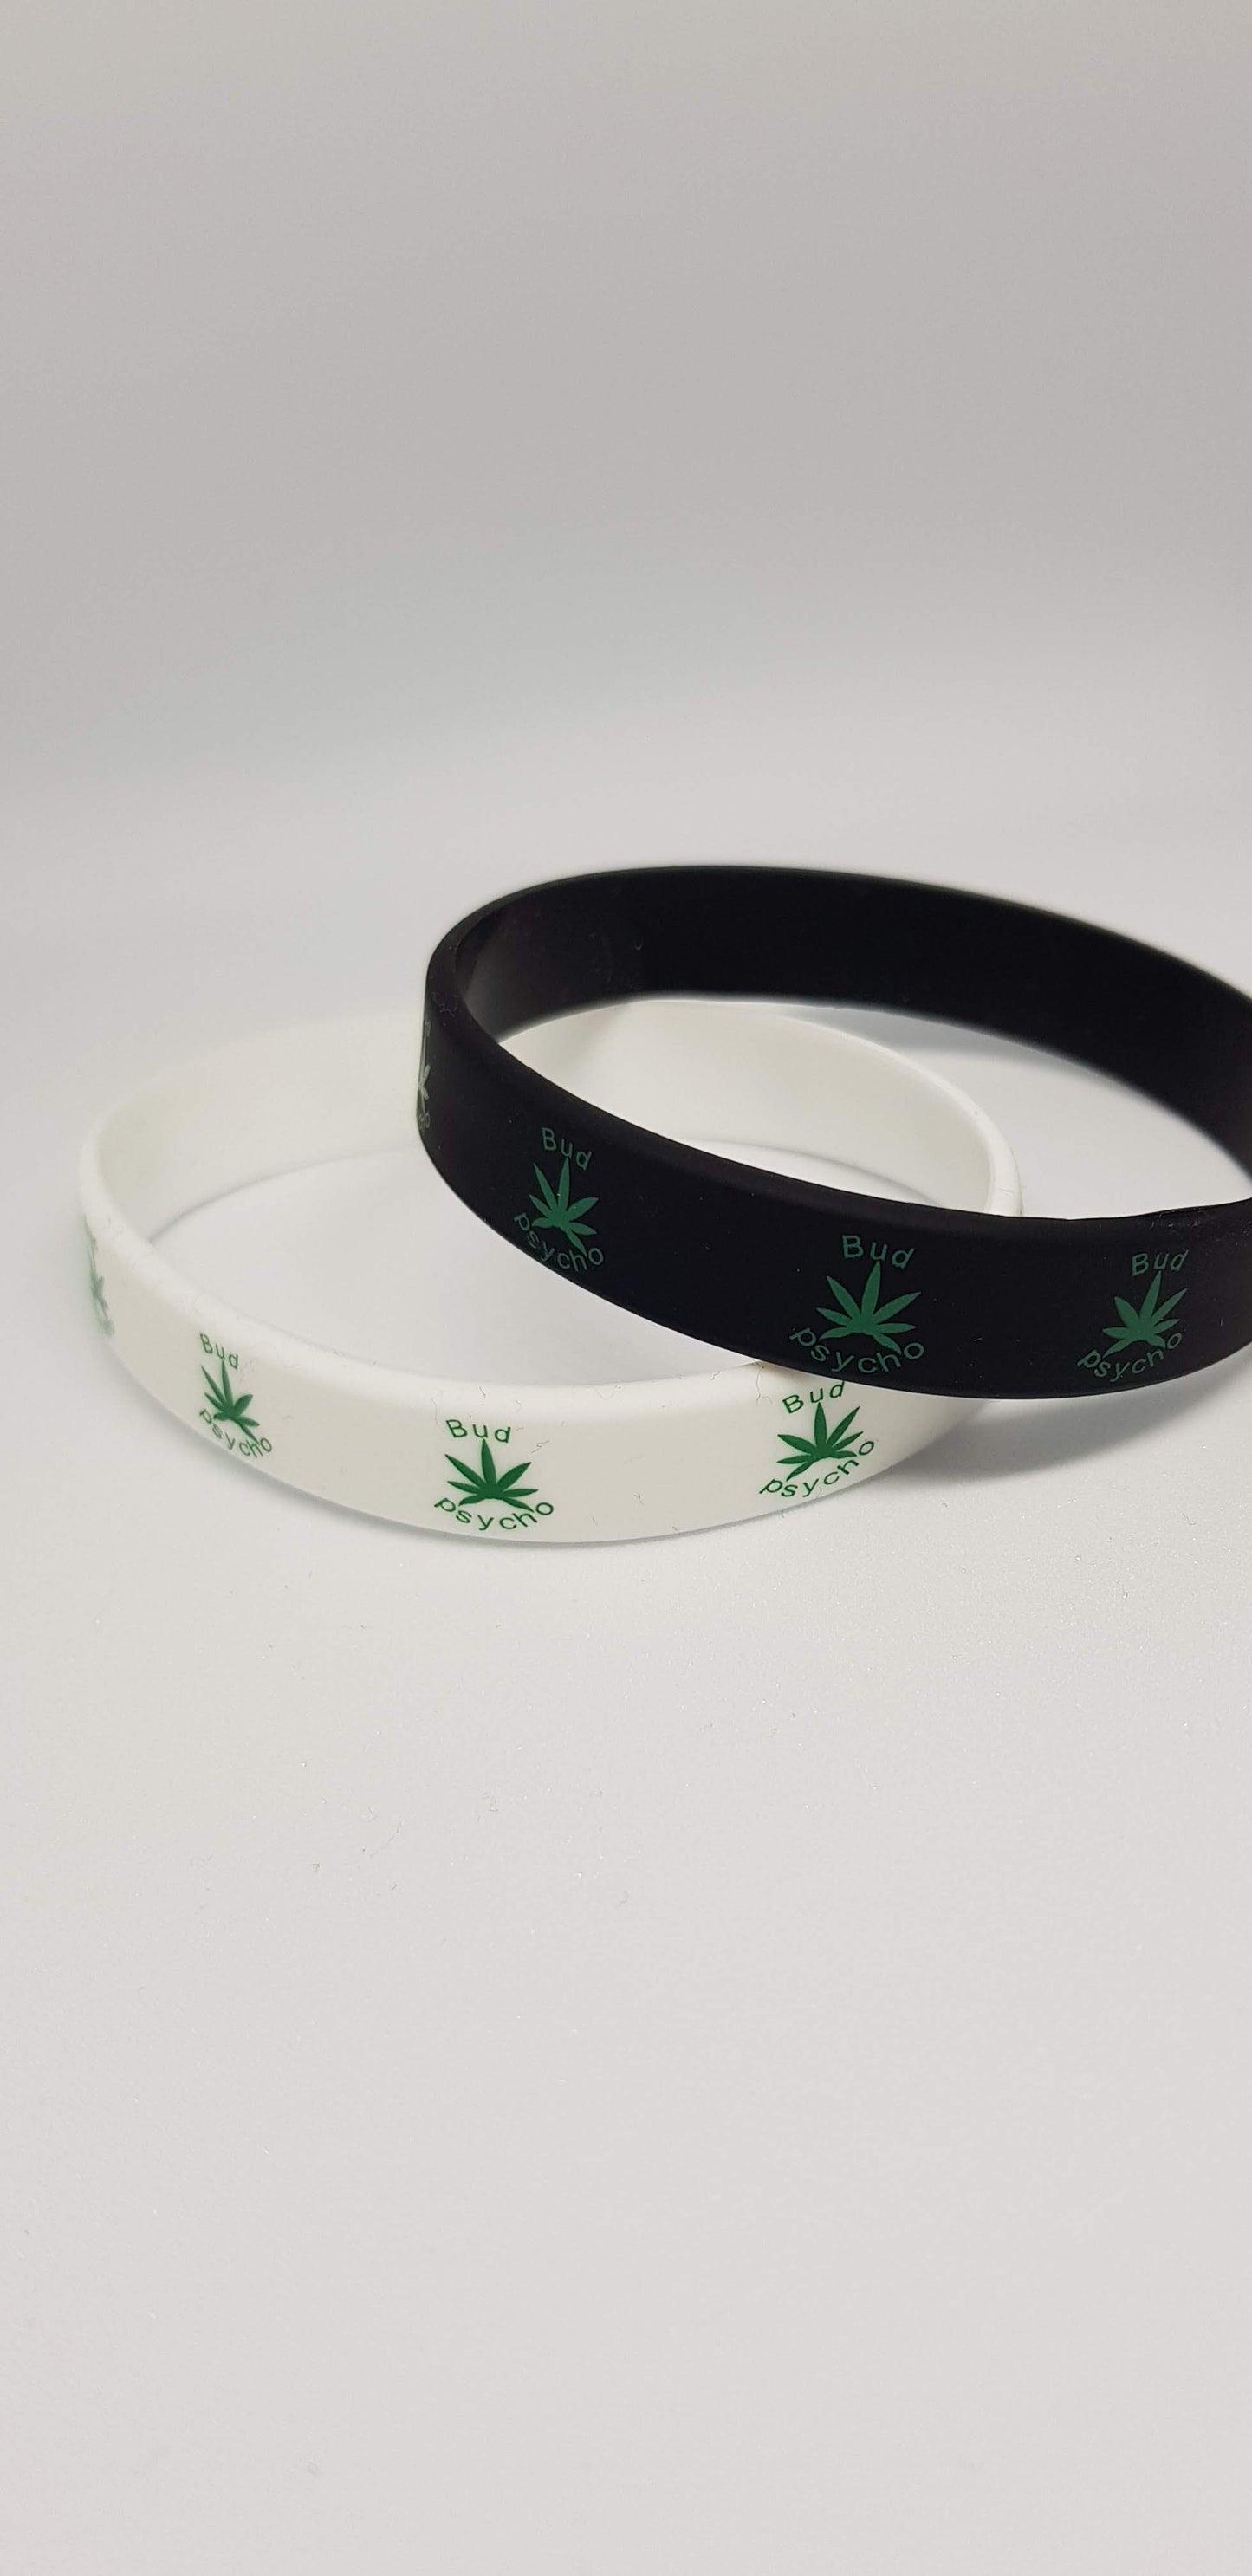 BUD PSYCHO SILICONE WRISTBANDS RUBBER BLACK WHITE BANDS ADULT WEED LEAF UNISEX